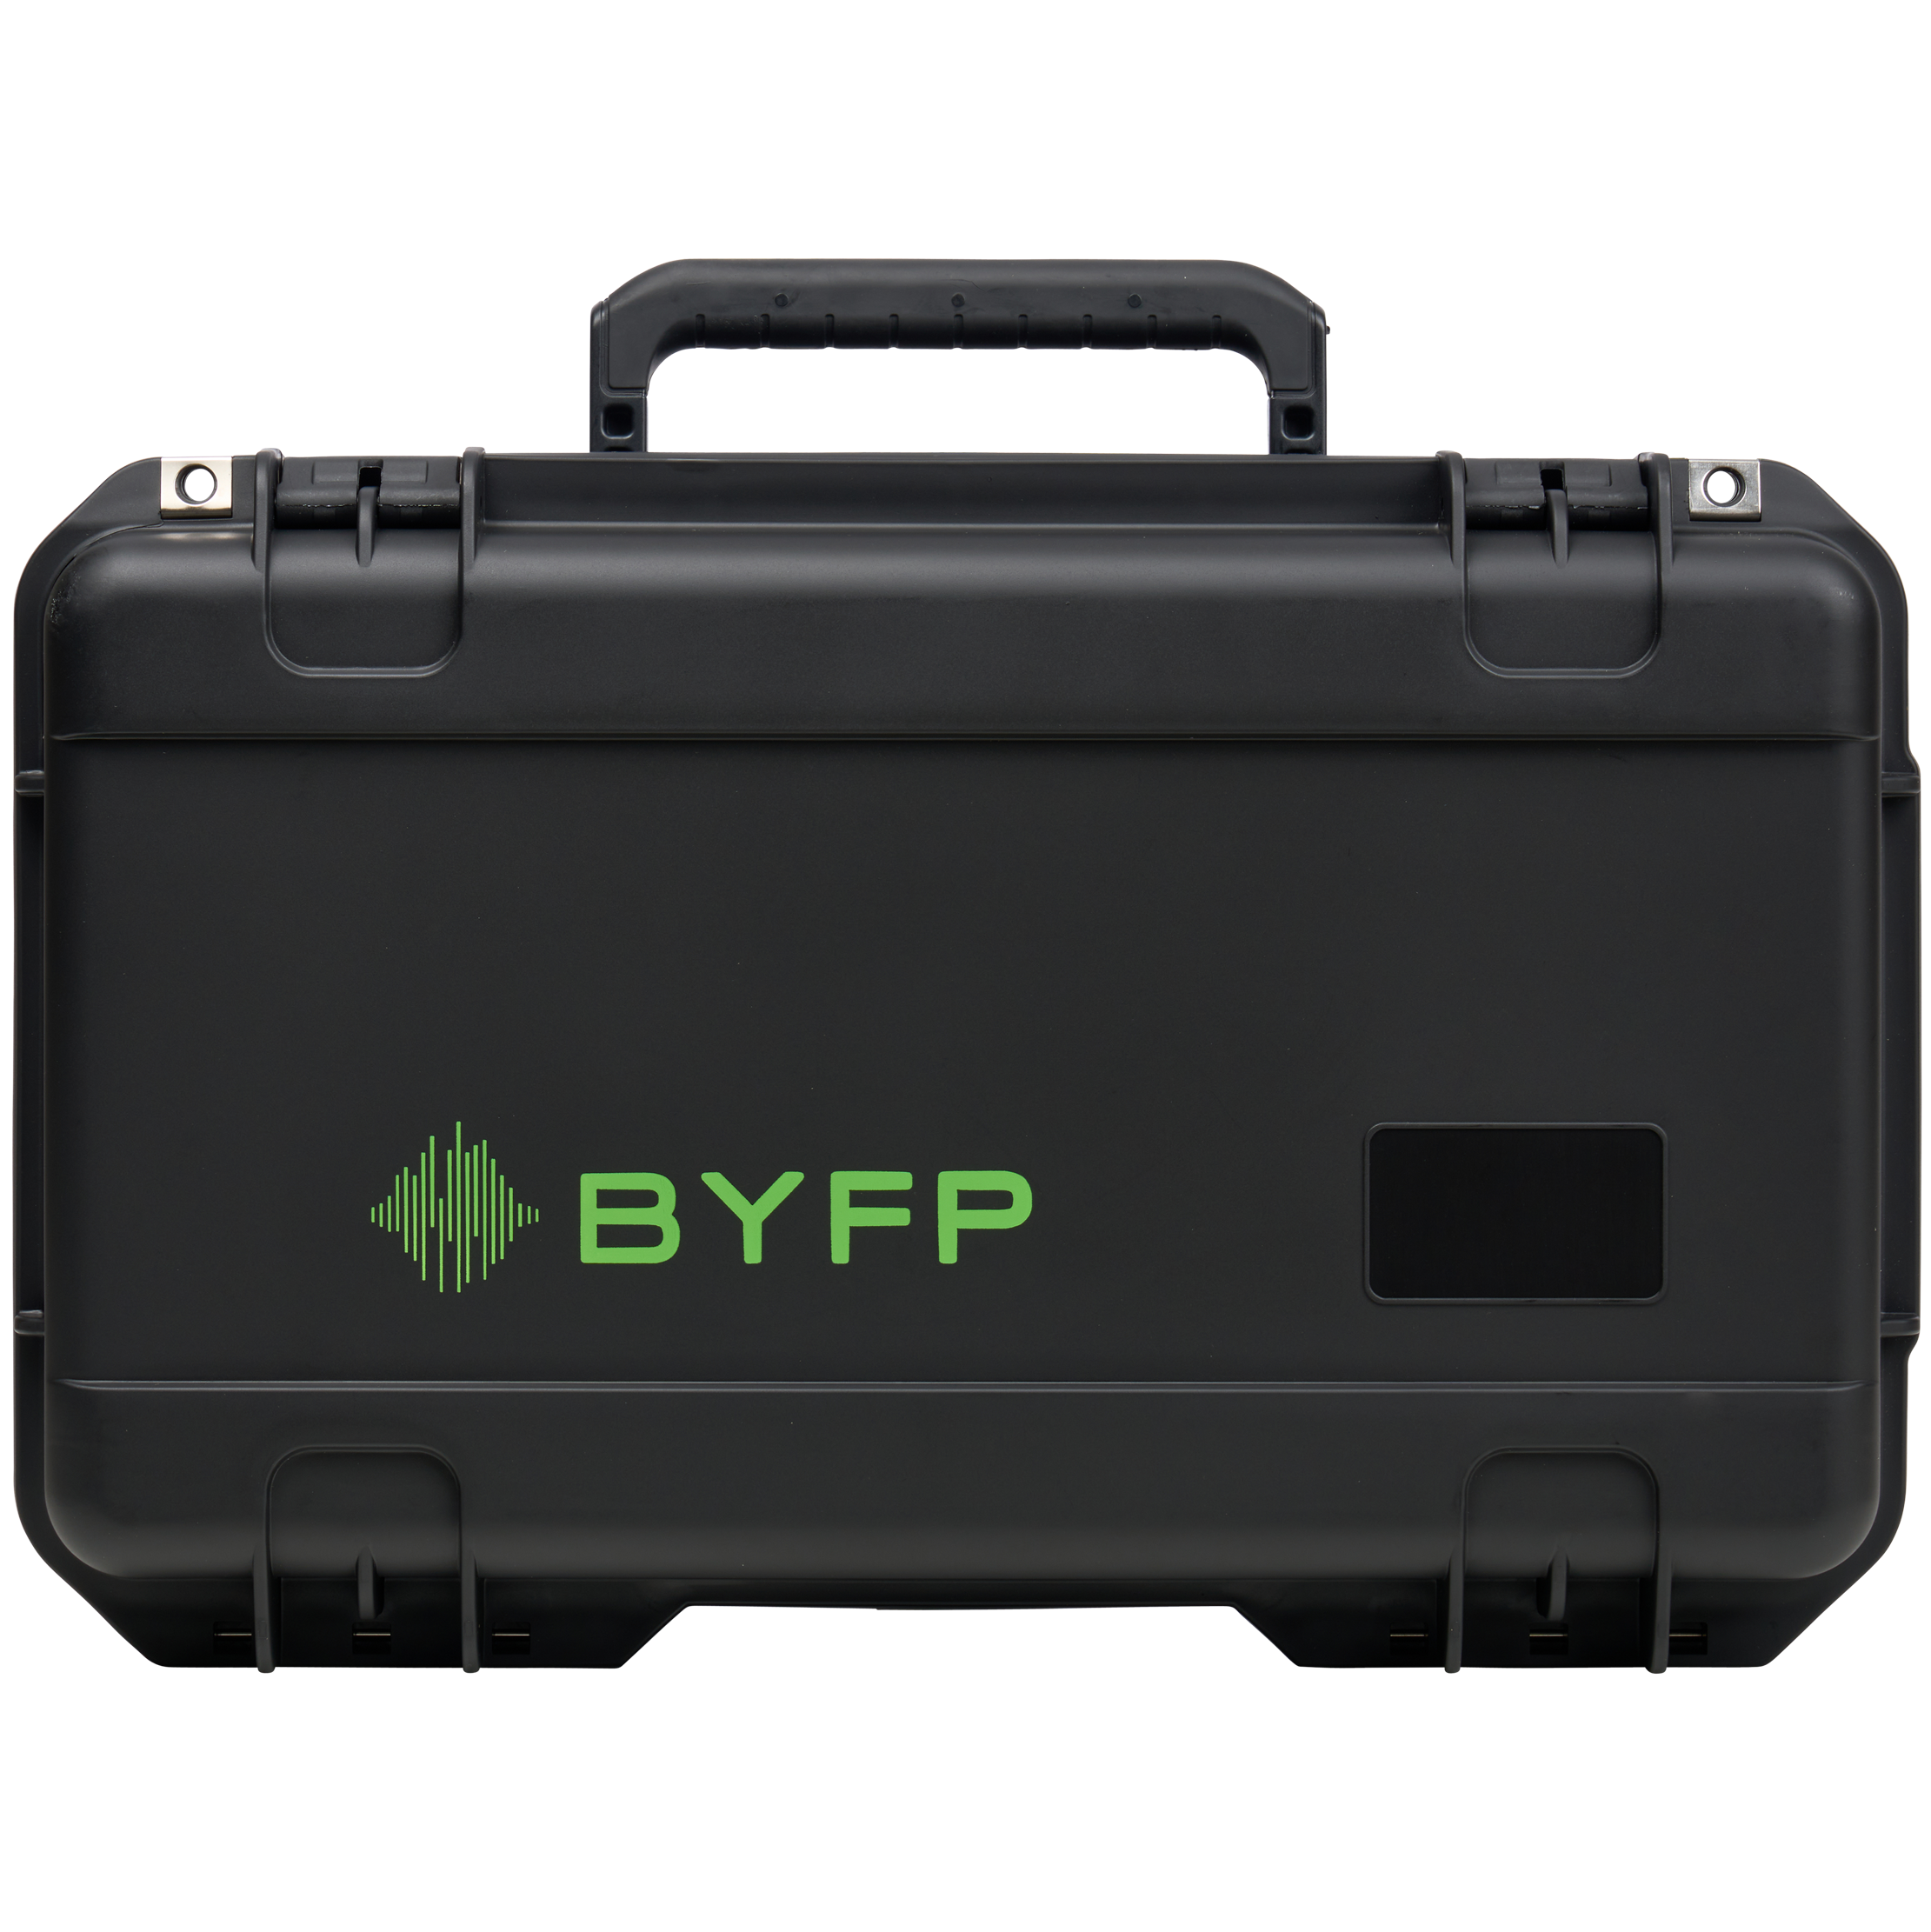 BYFP ipCase for 12x Wired Microphones